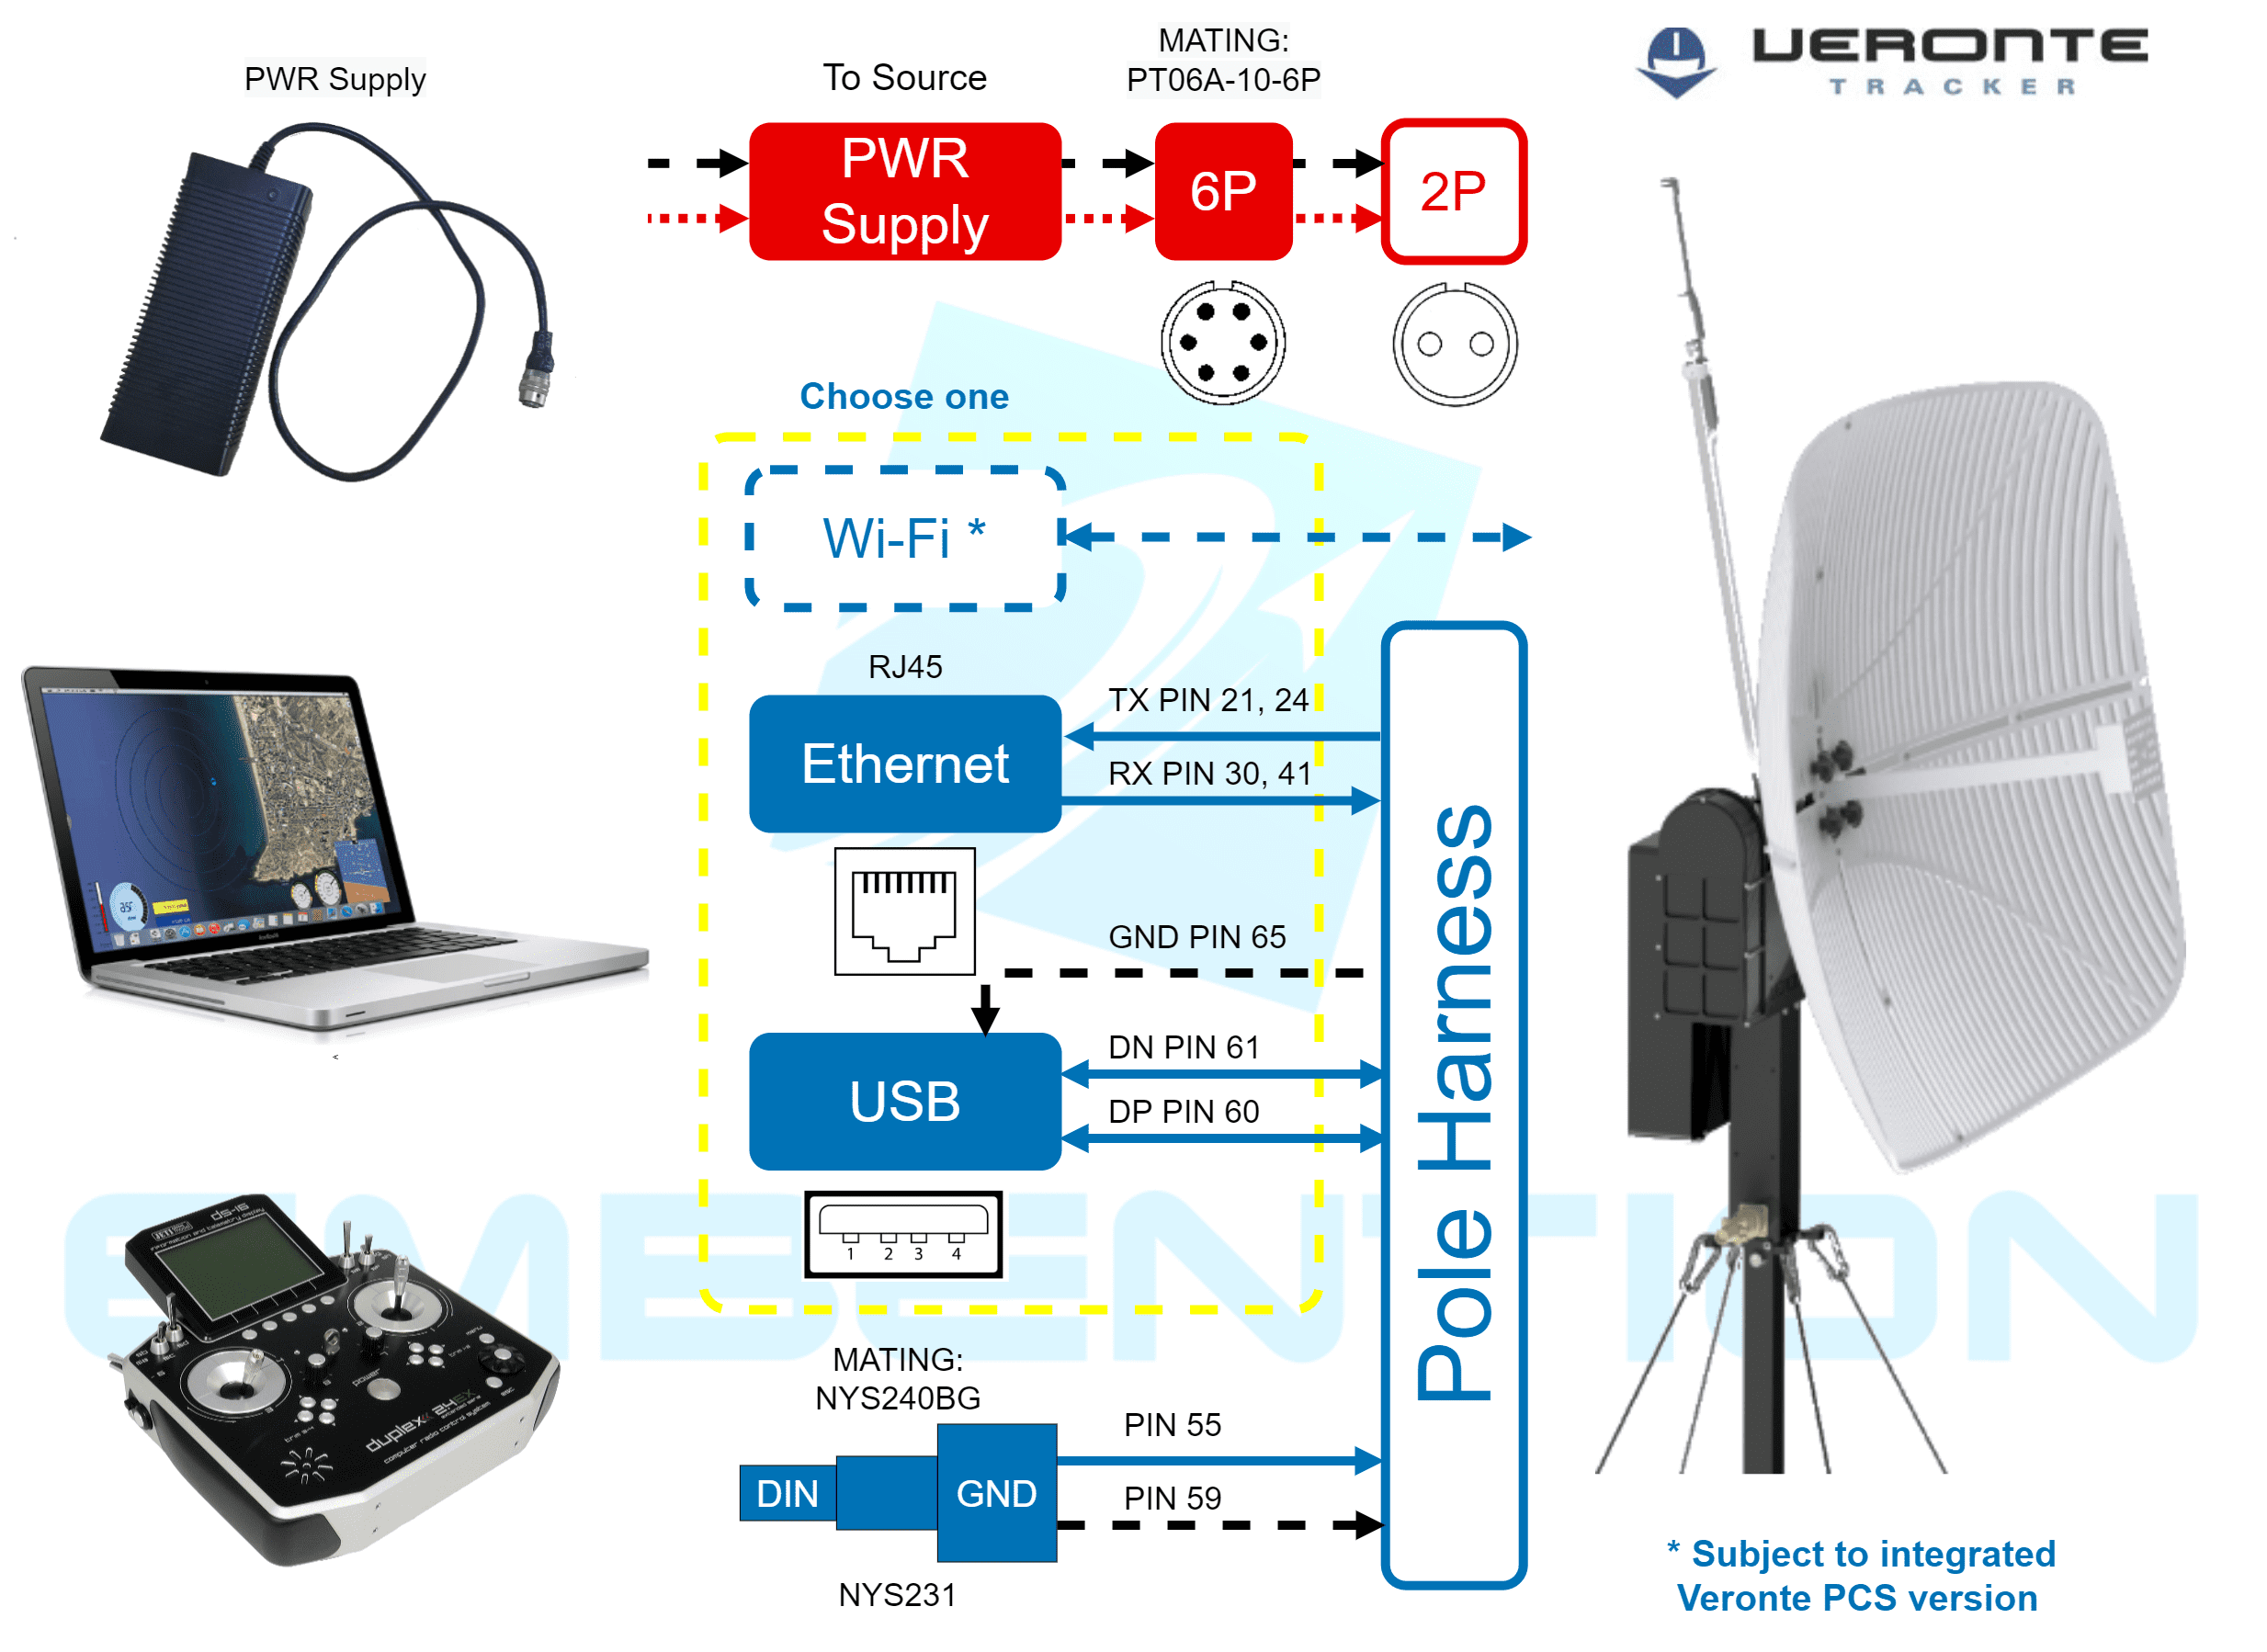 Annex 2: Connection examples - Computer to Veronte Tracker Ground Station